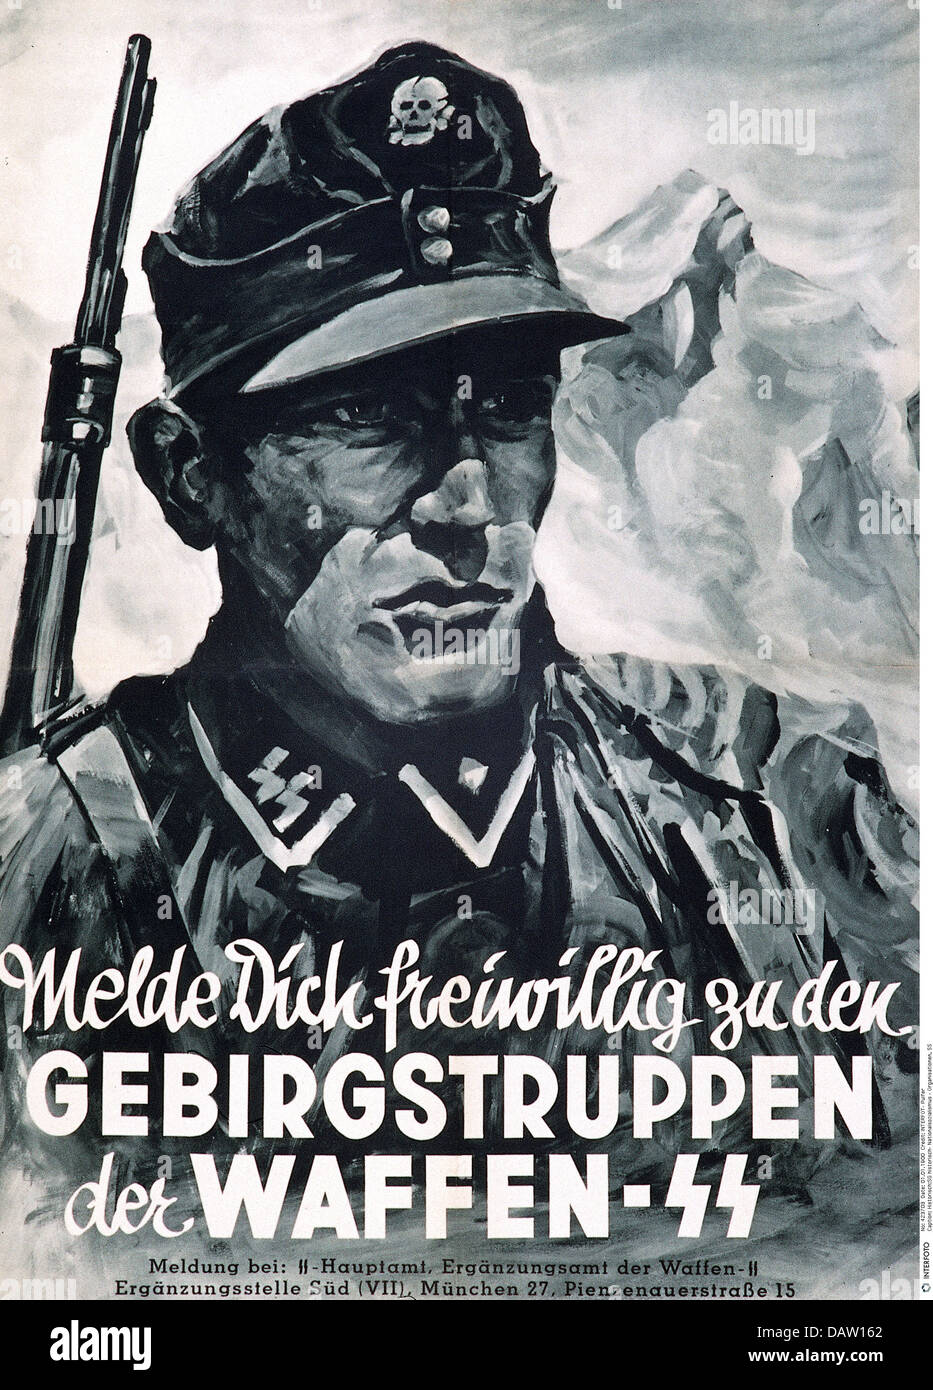 National Socialism / Nazism, organisations, SS (Schutzstaffel), Waffen-SS, recruiting poster 'Volunteer for the SS mountain troops', Munich, Germany, circa 1942, Additional-Rights-Clearences-Not Available Stock Photo